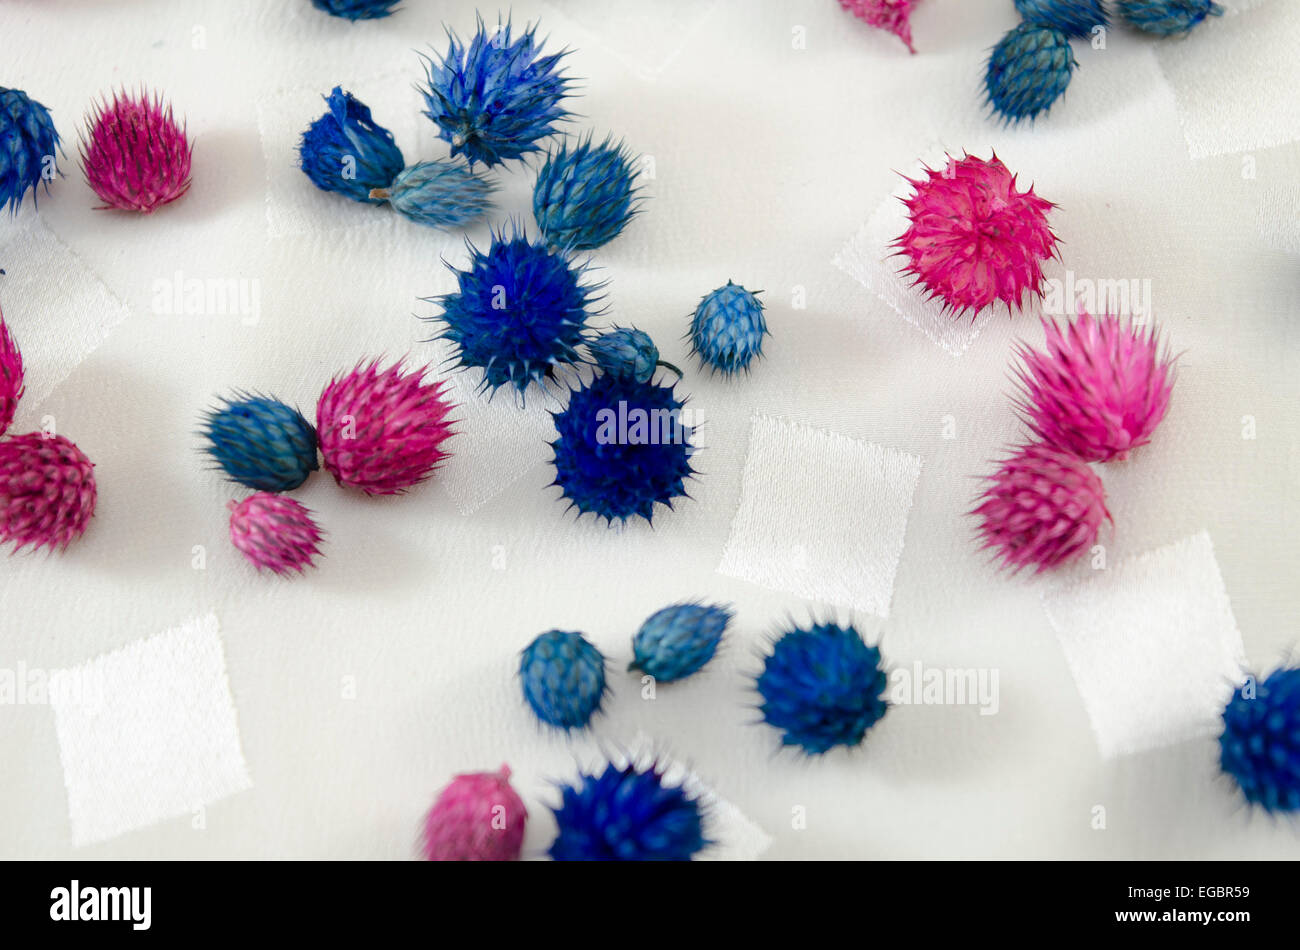 Dyed flowers on a tablecloth Stock Photo